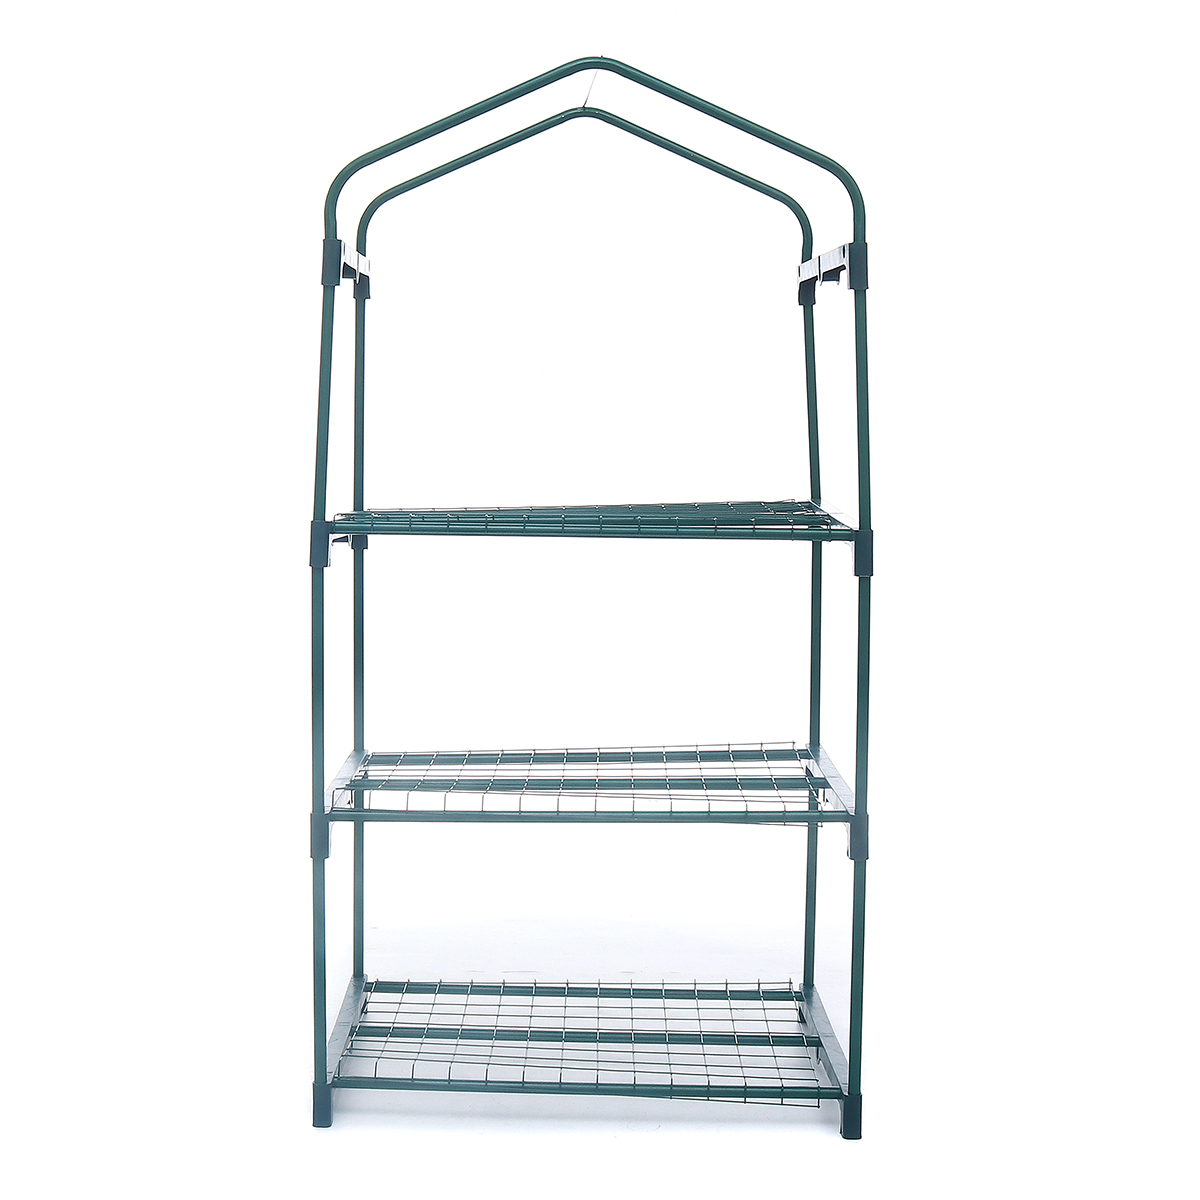 Mini-Greenhouse-AUEDW-3-Shelves-IndoorOutdoor-Greenhouse-with-Zippered-Cover-and-Metal-Shelves-for-G-1592630-8